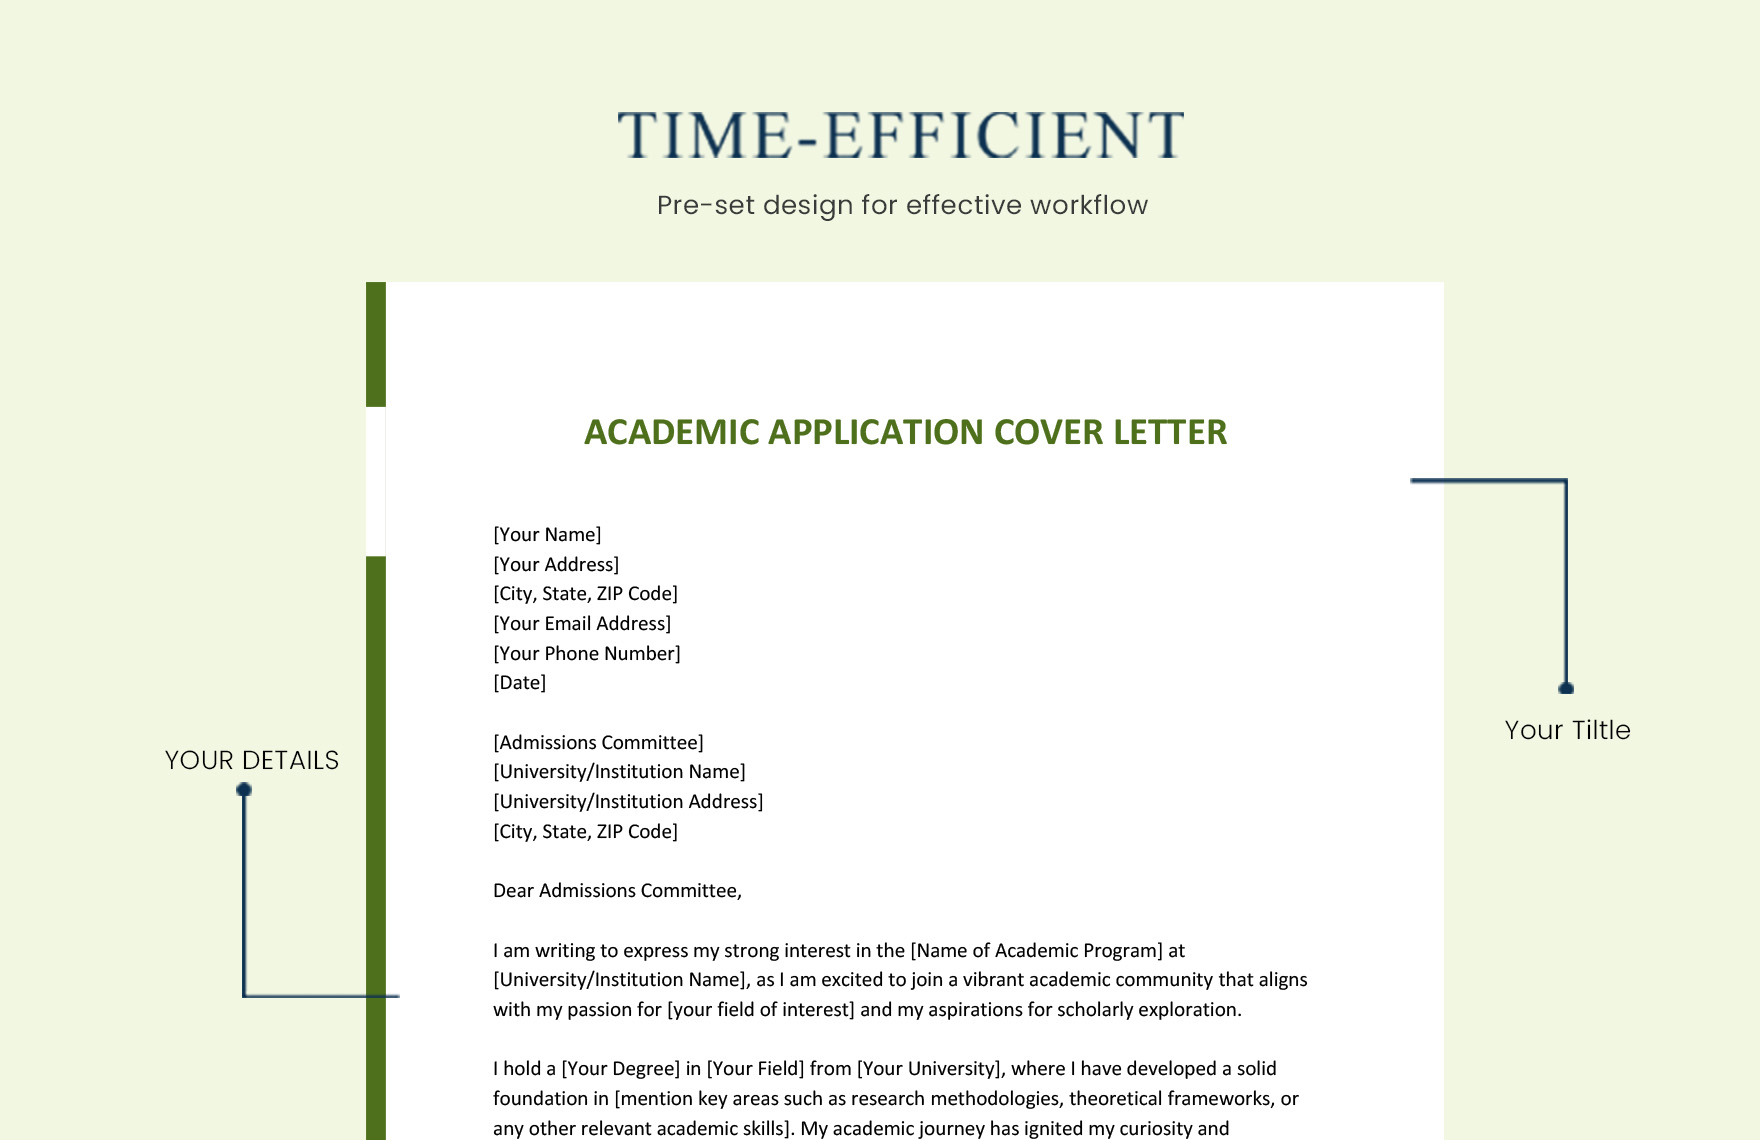 Academic Application Cover Letter